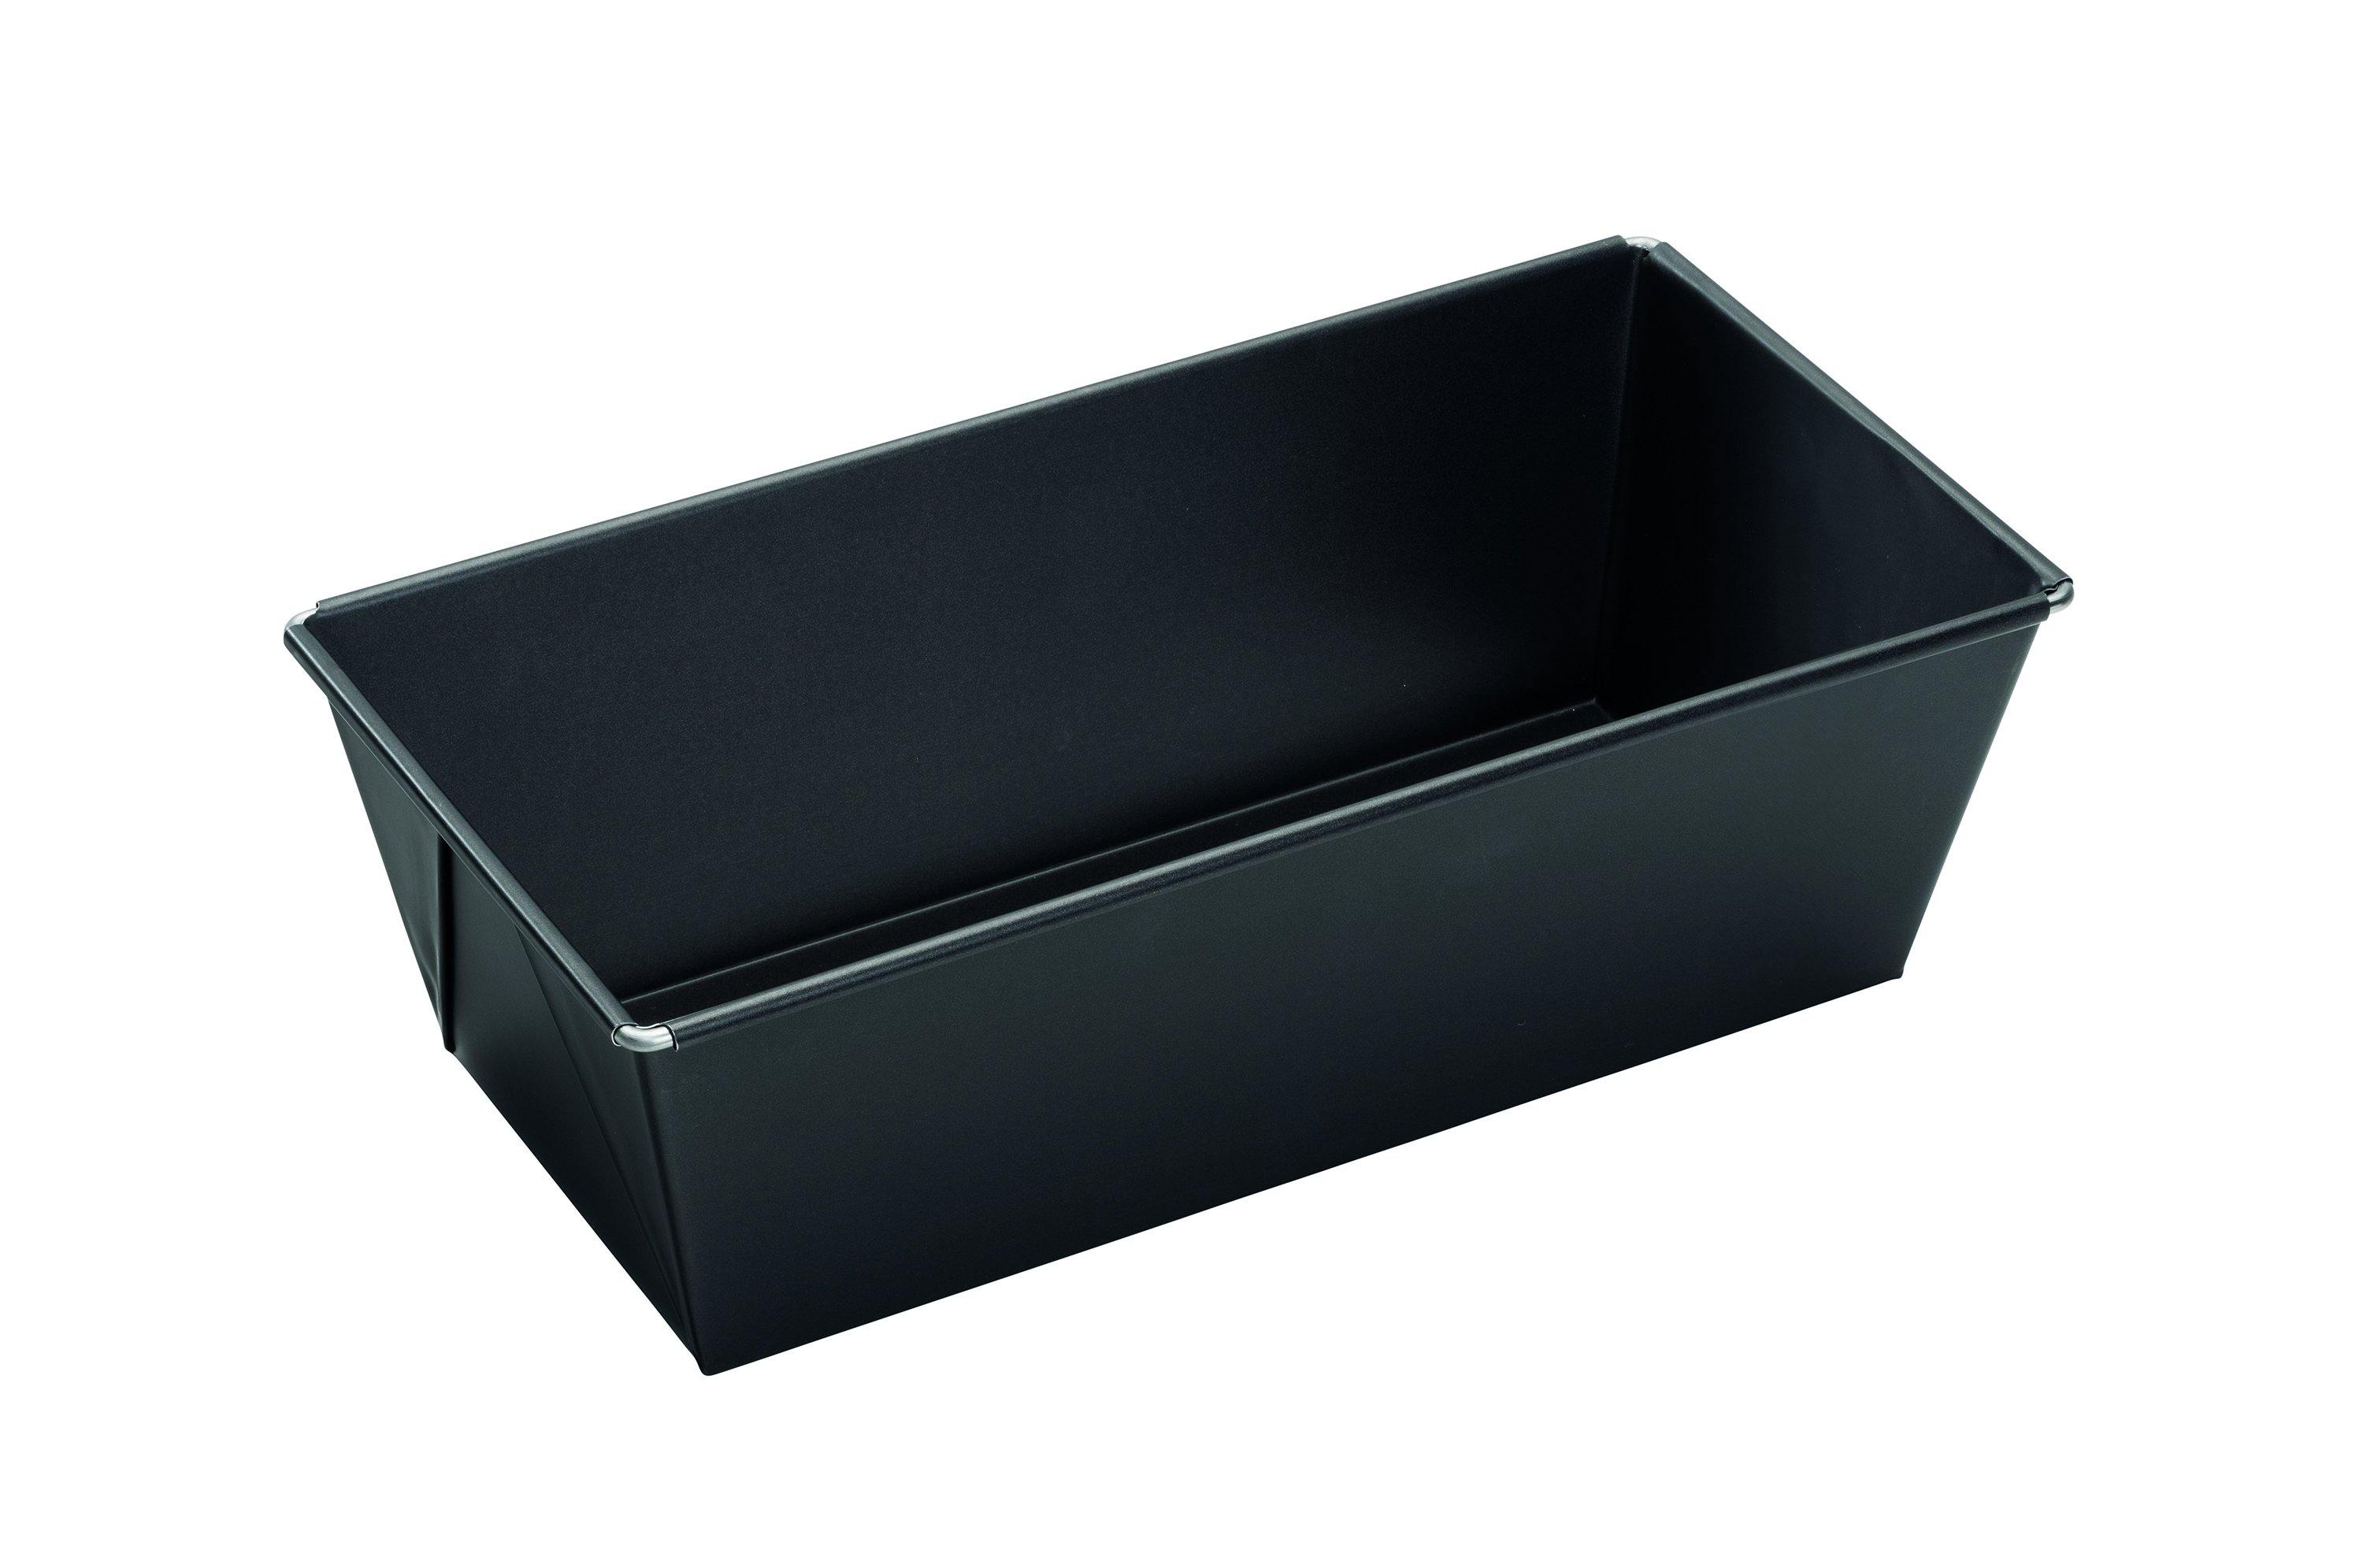 Dr. Oetker "Back-Idee Kreativ" Bread Tin Non-Stick, Black, 30X16X10 Cm - Whole and All